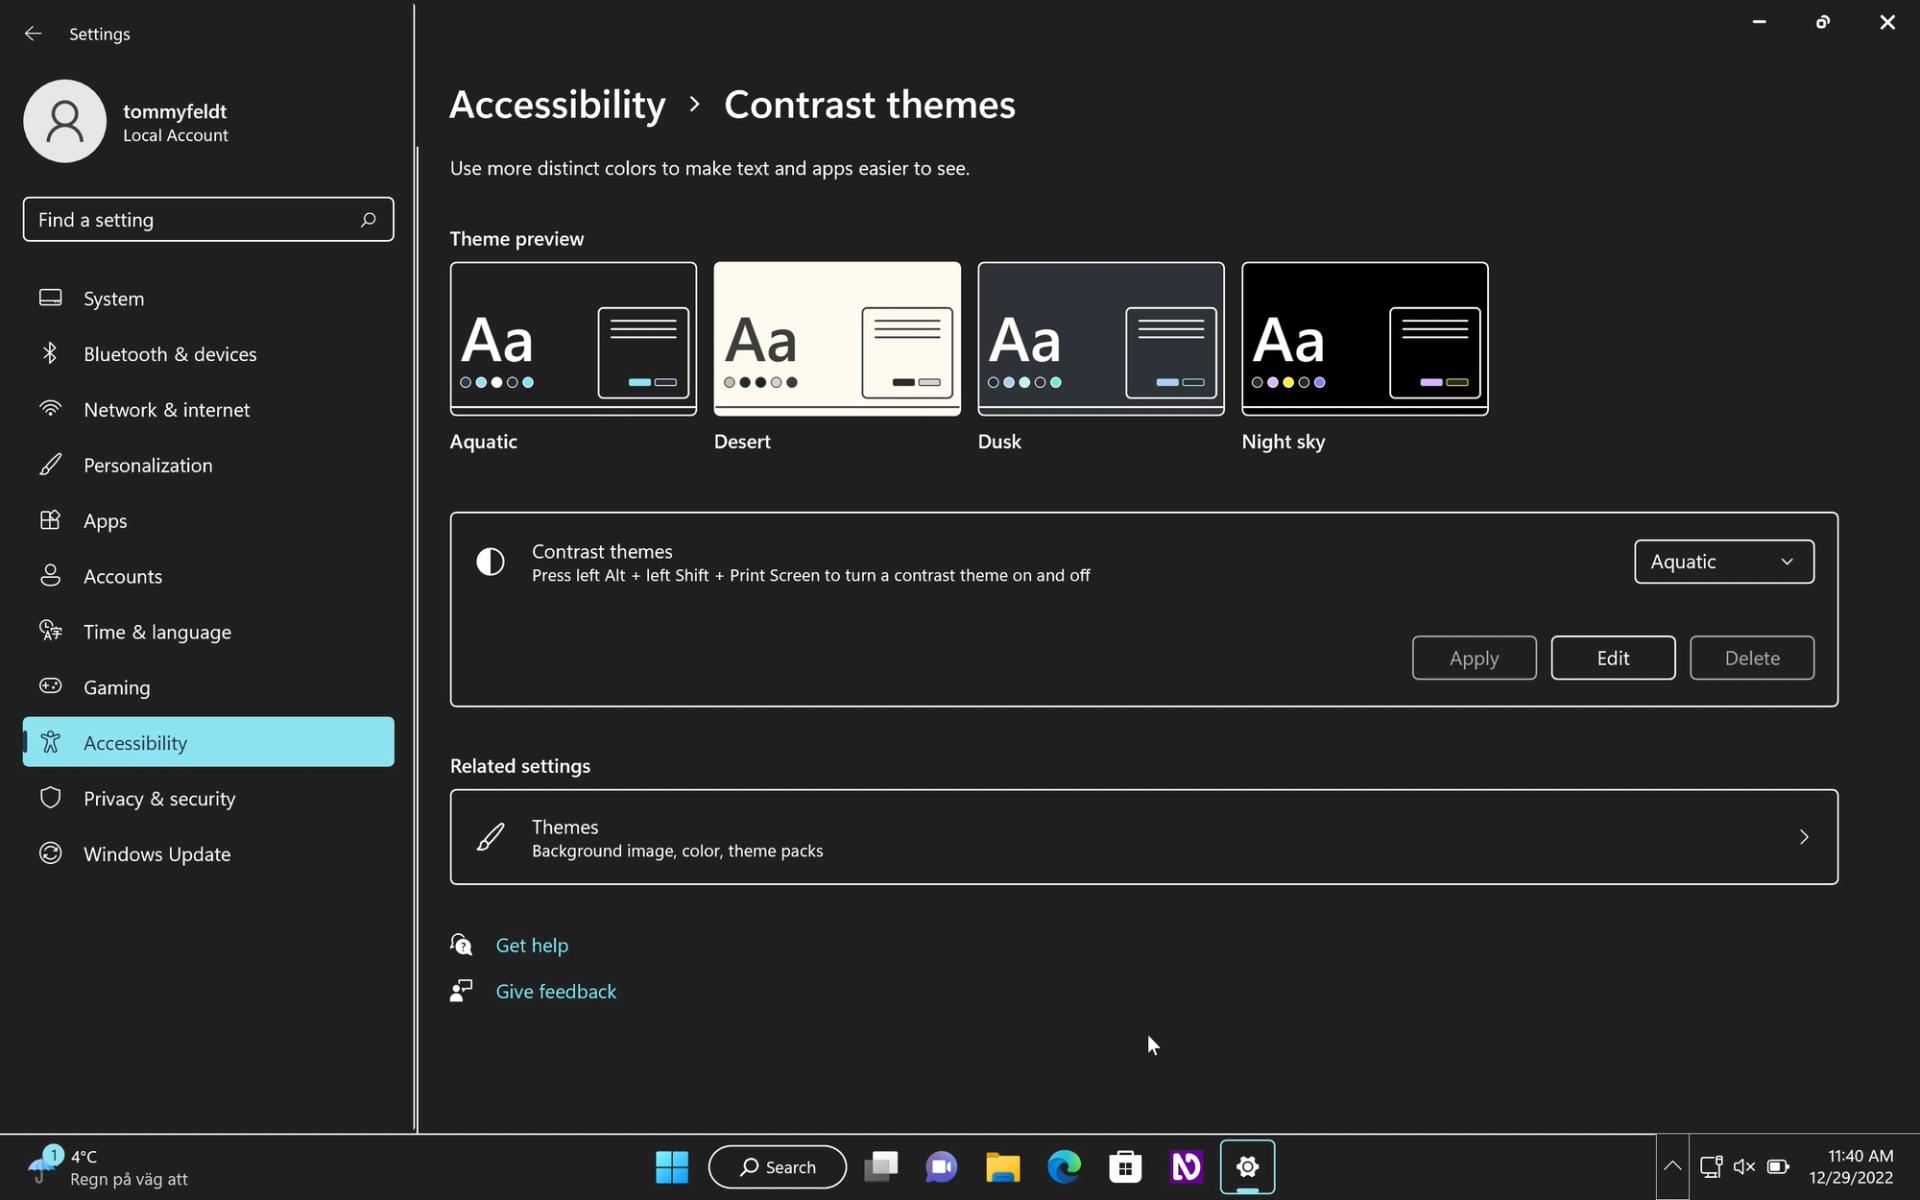 Screenshot of Windows 11 contrast theme settings with Aquatic theme enabled.